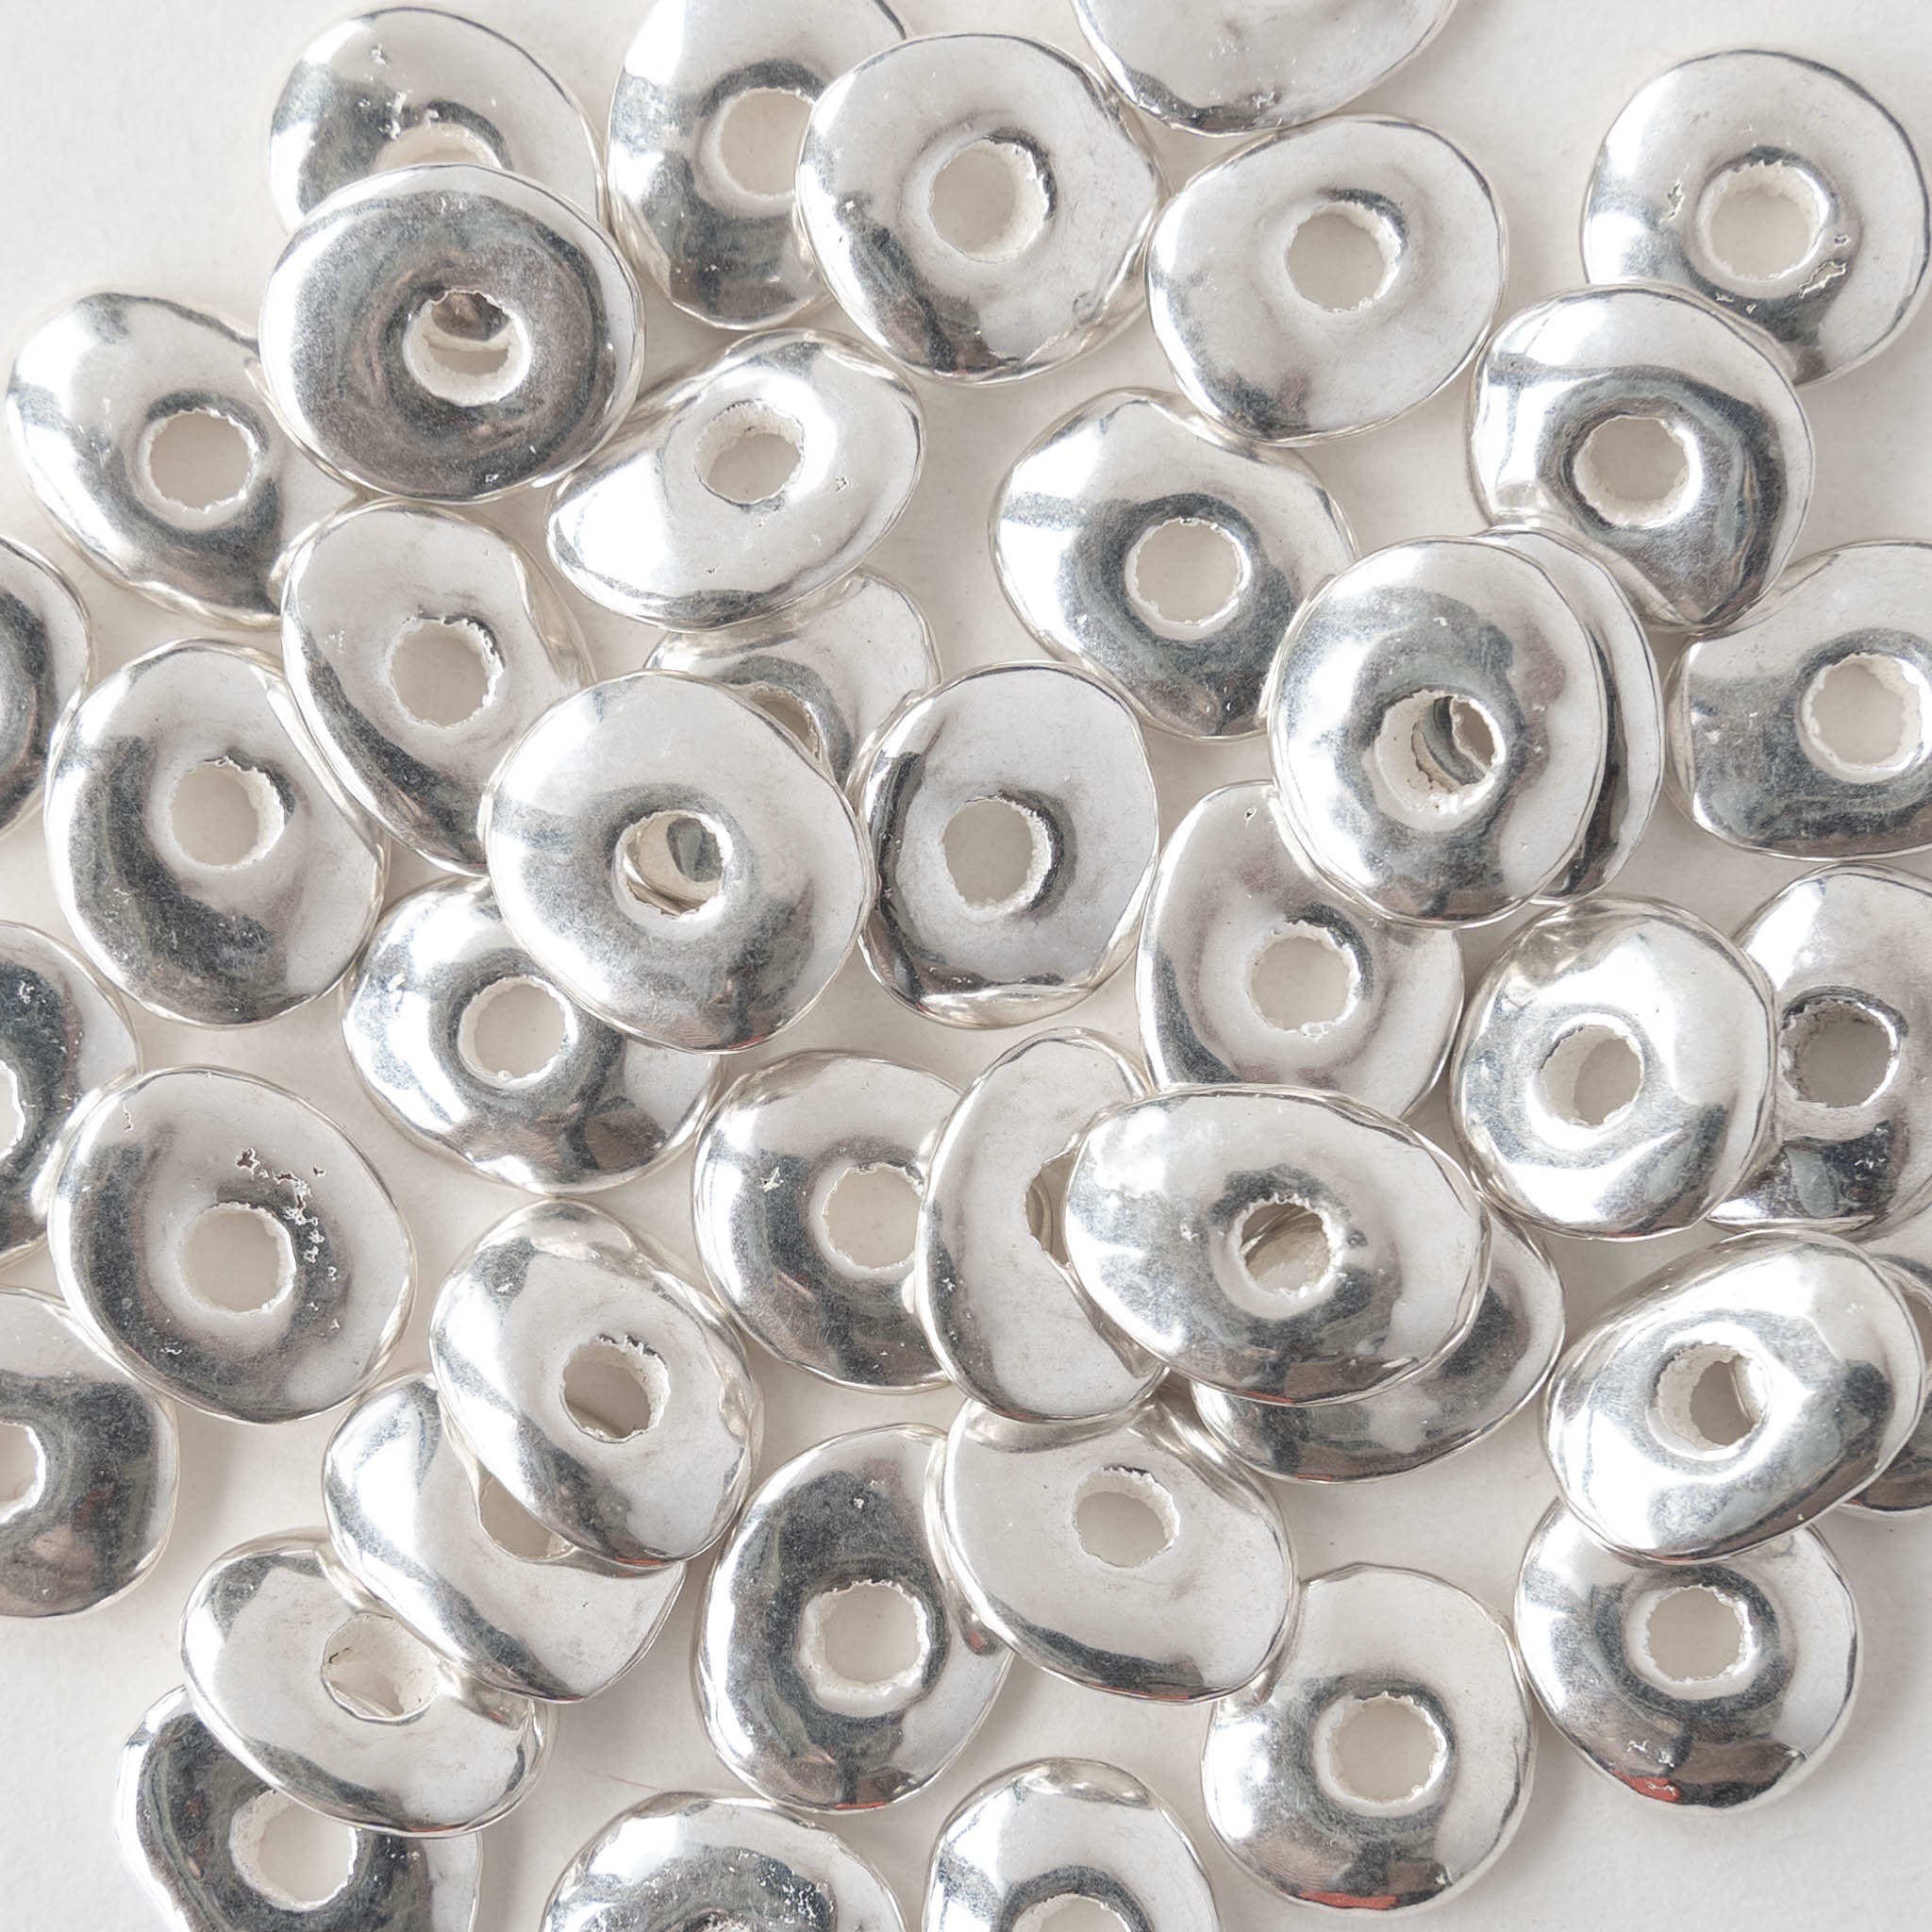 6mm Heishi Washer Bead Spacers, Mykonos Greek Beads, Round Metal Beads,  3.2mm Hole, Jewelry Making Supply, Matte Antique Silver Plated, 20pc